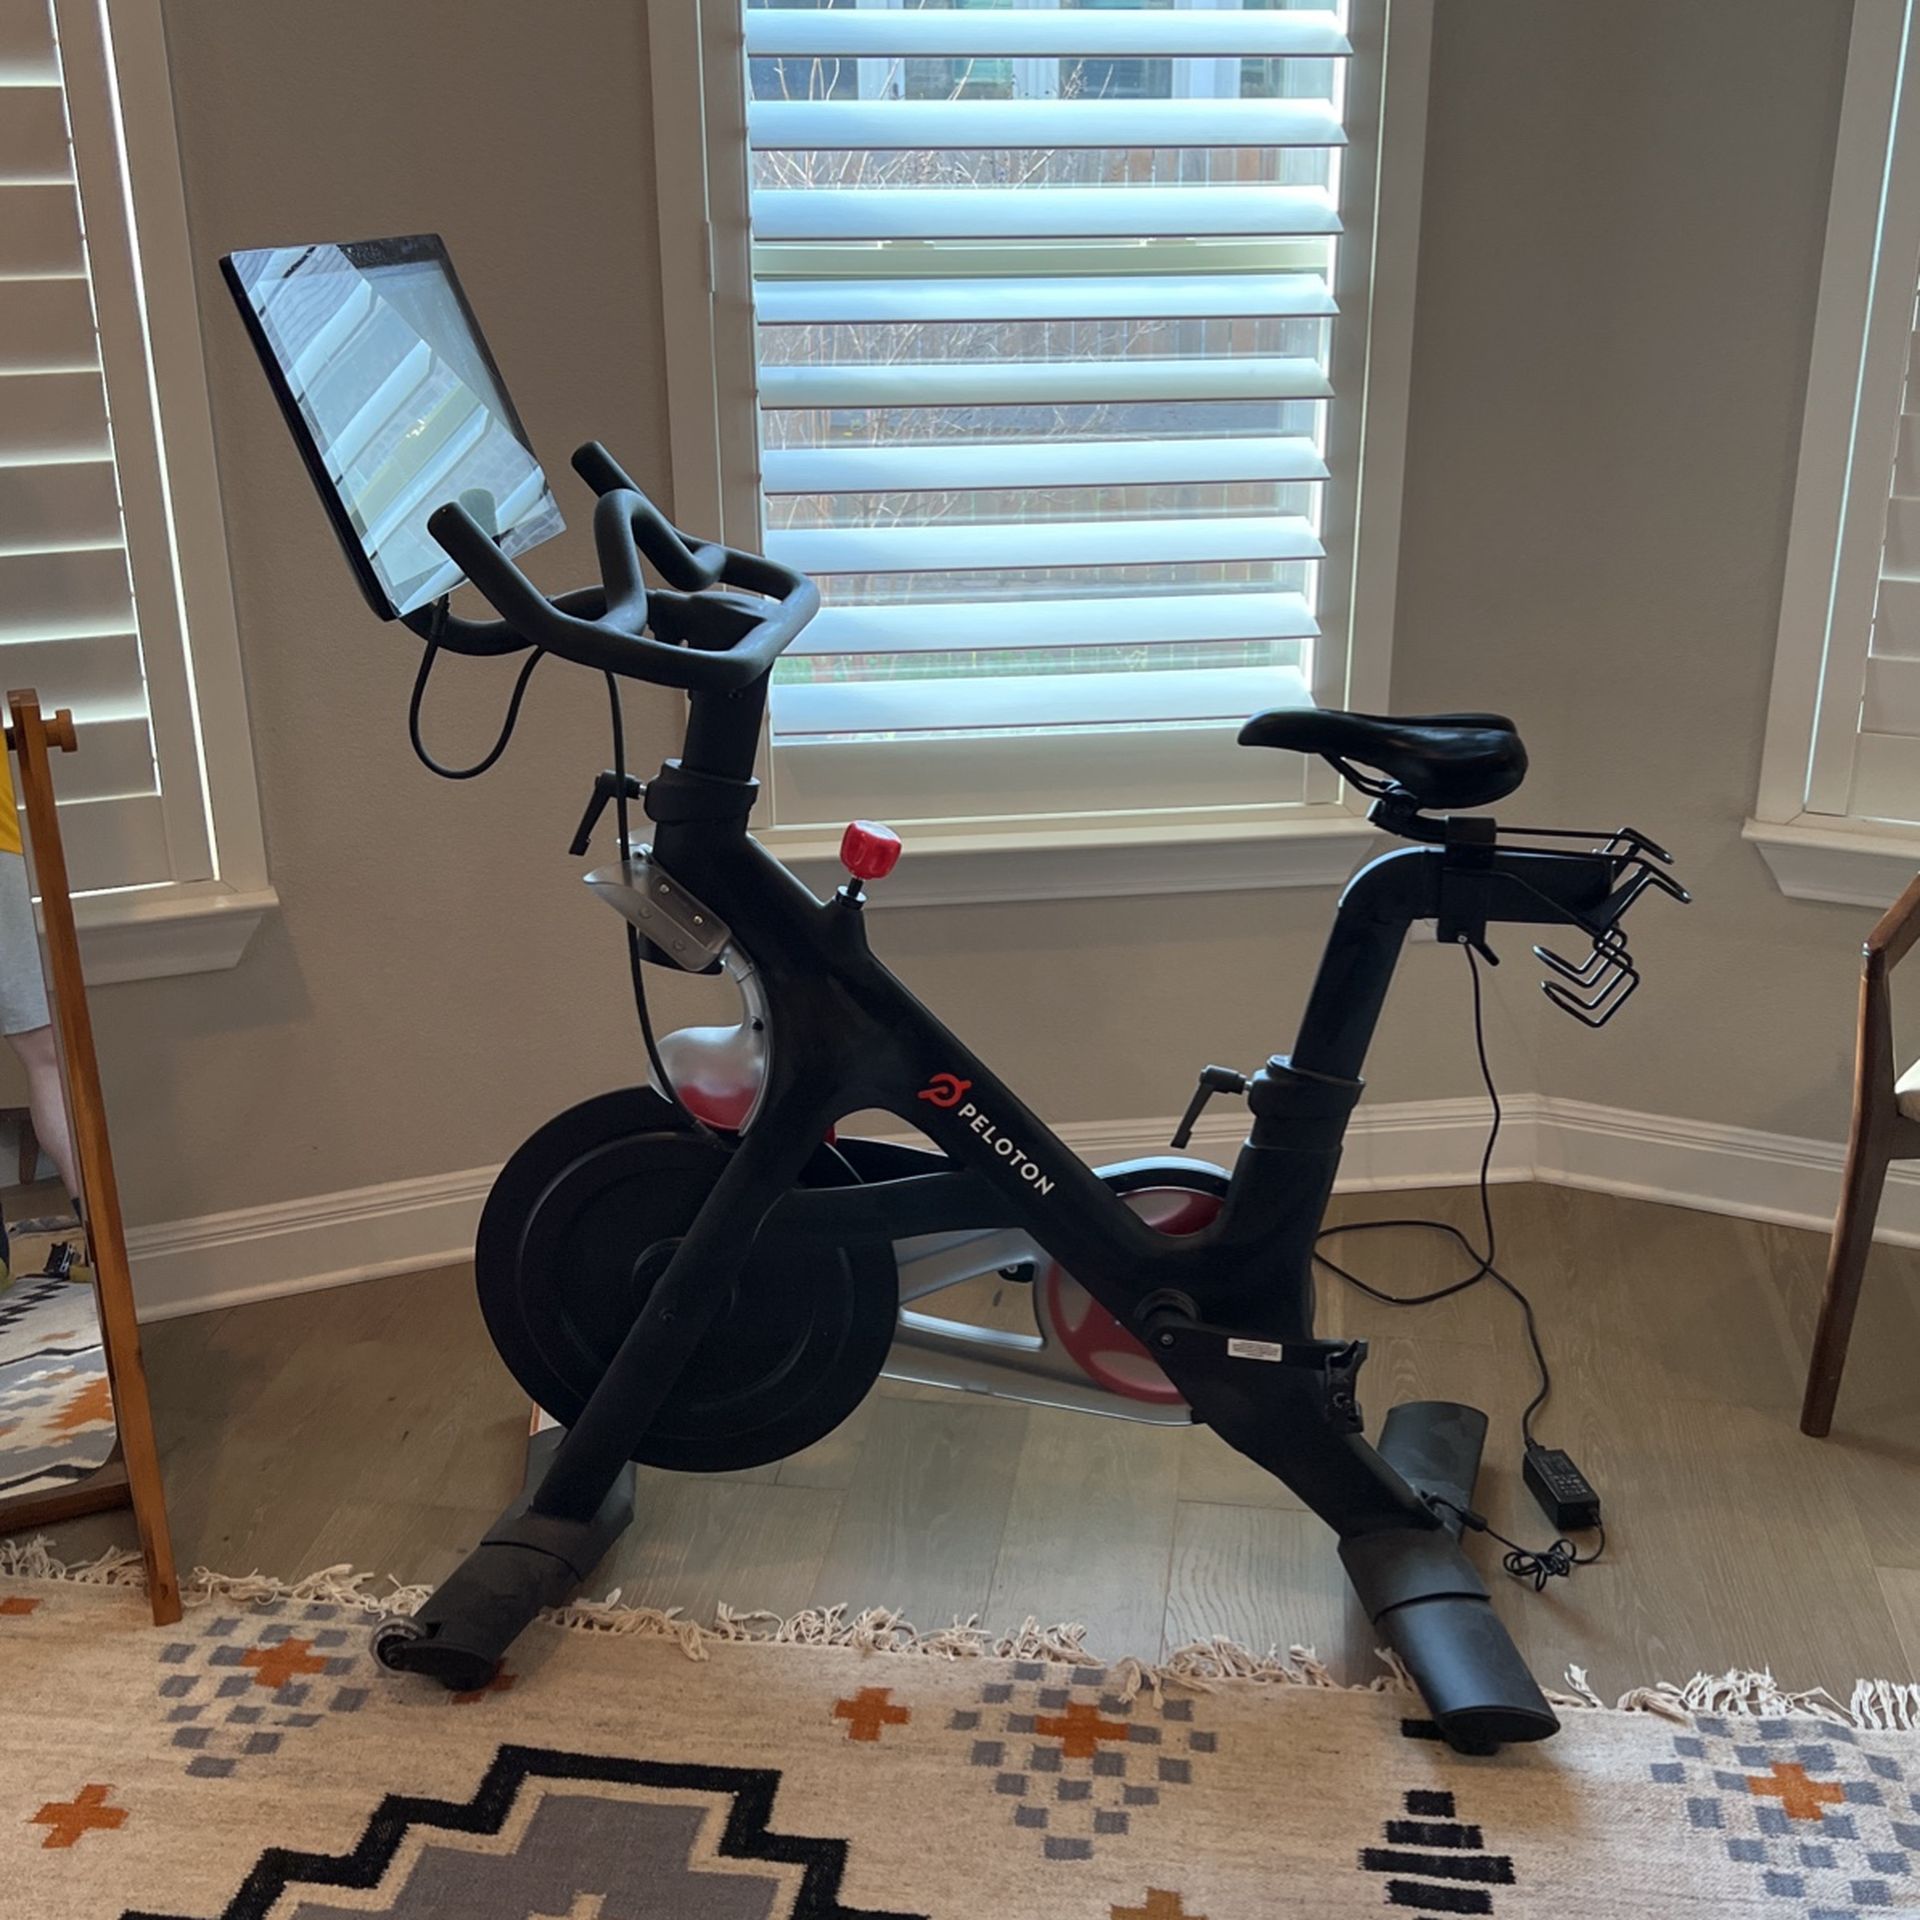 Peloton Bike | Indoor Stationary Exercise Bike with Immersive 22" HD Touchscreen